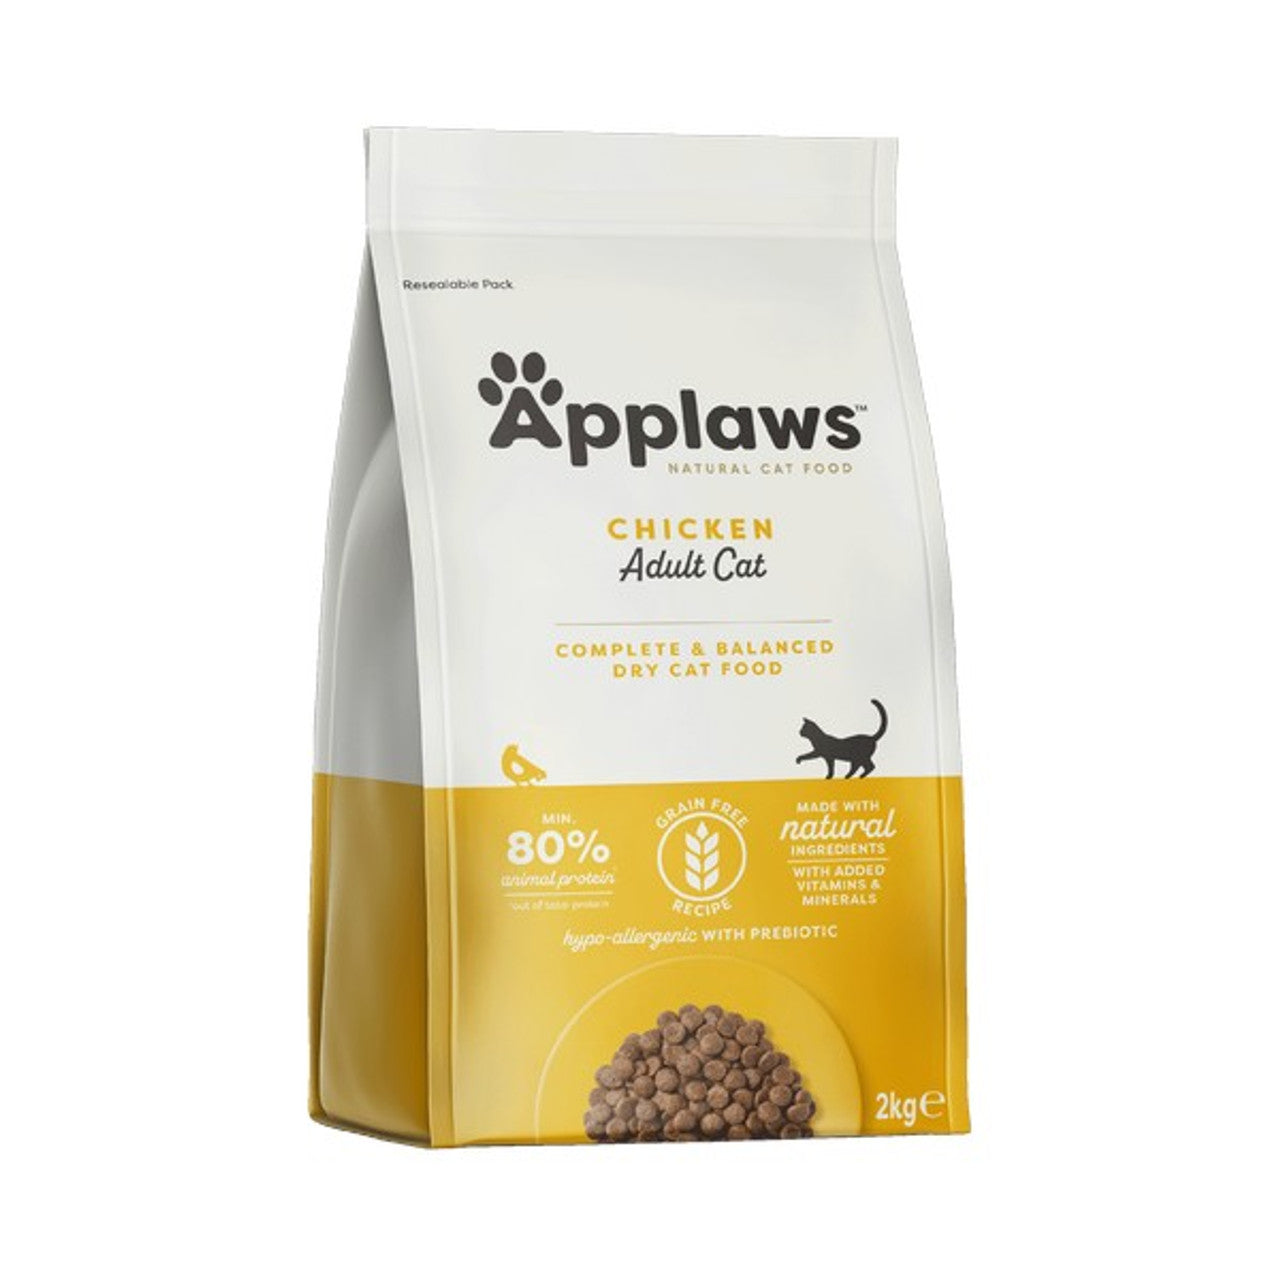 Applaws Natural Complete Adult Cat Chicken 2kg